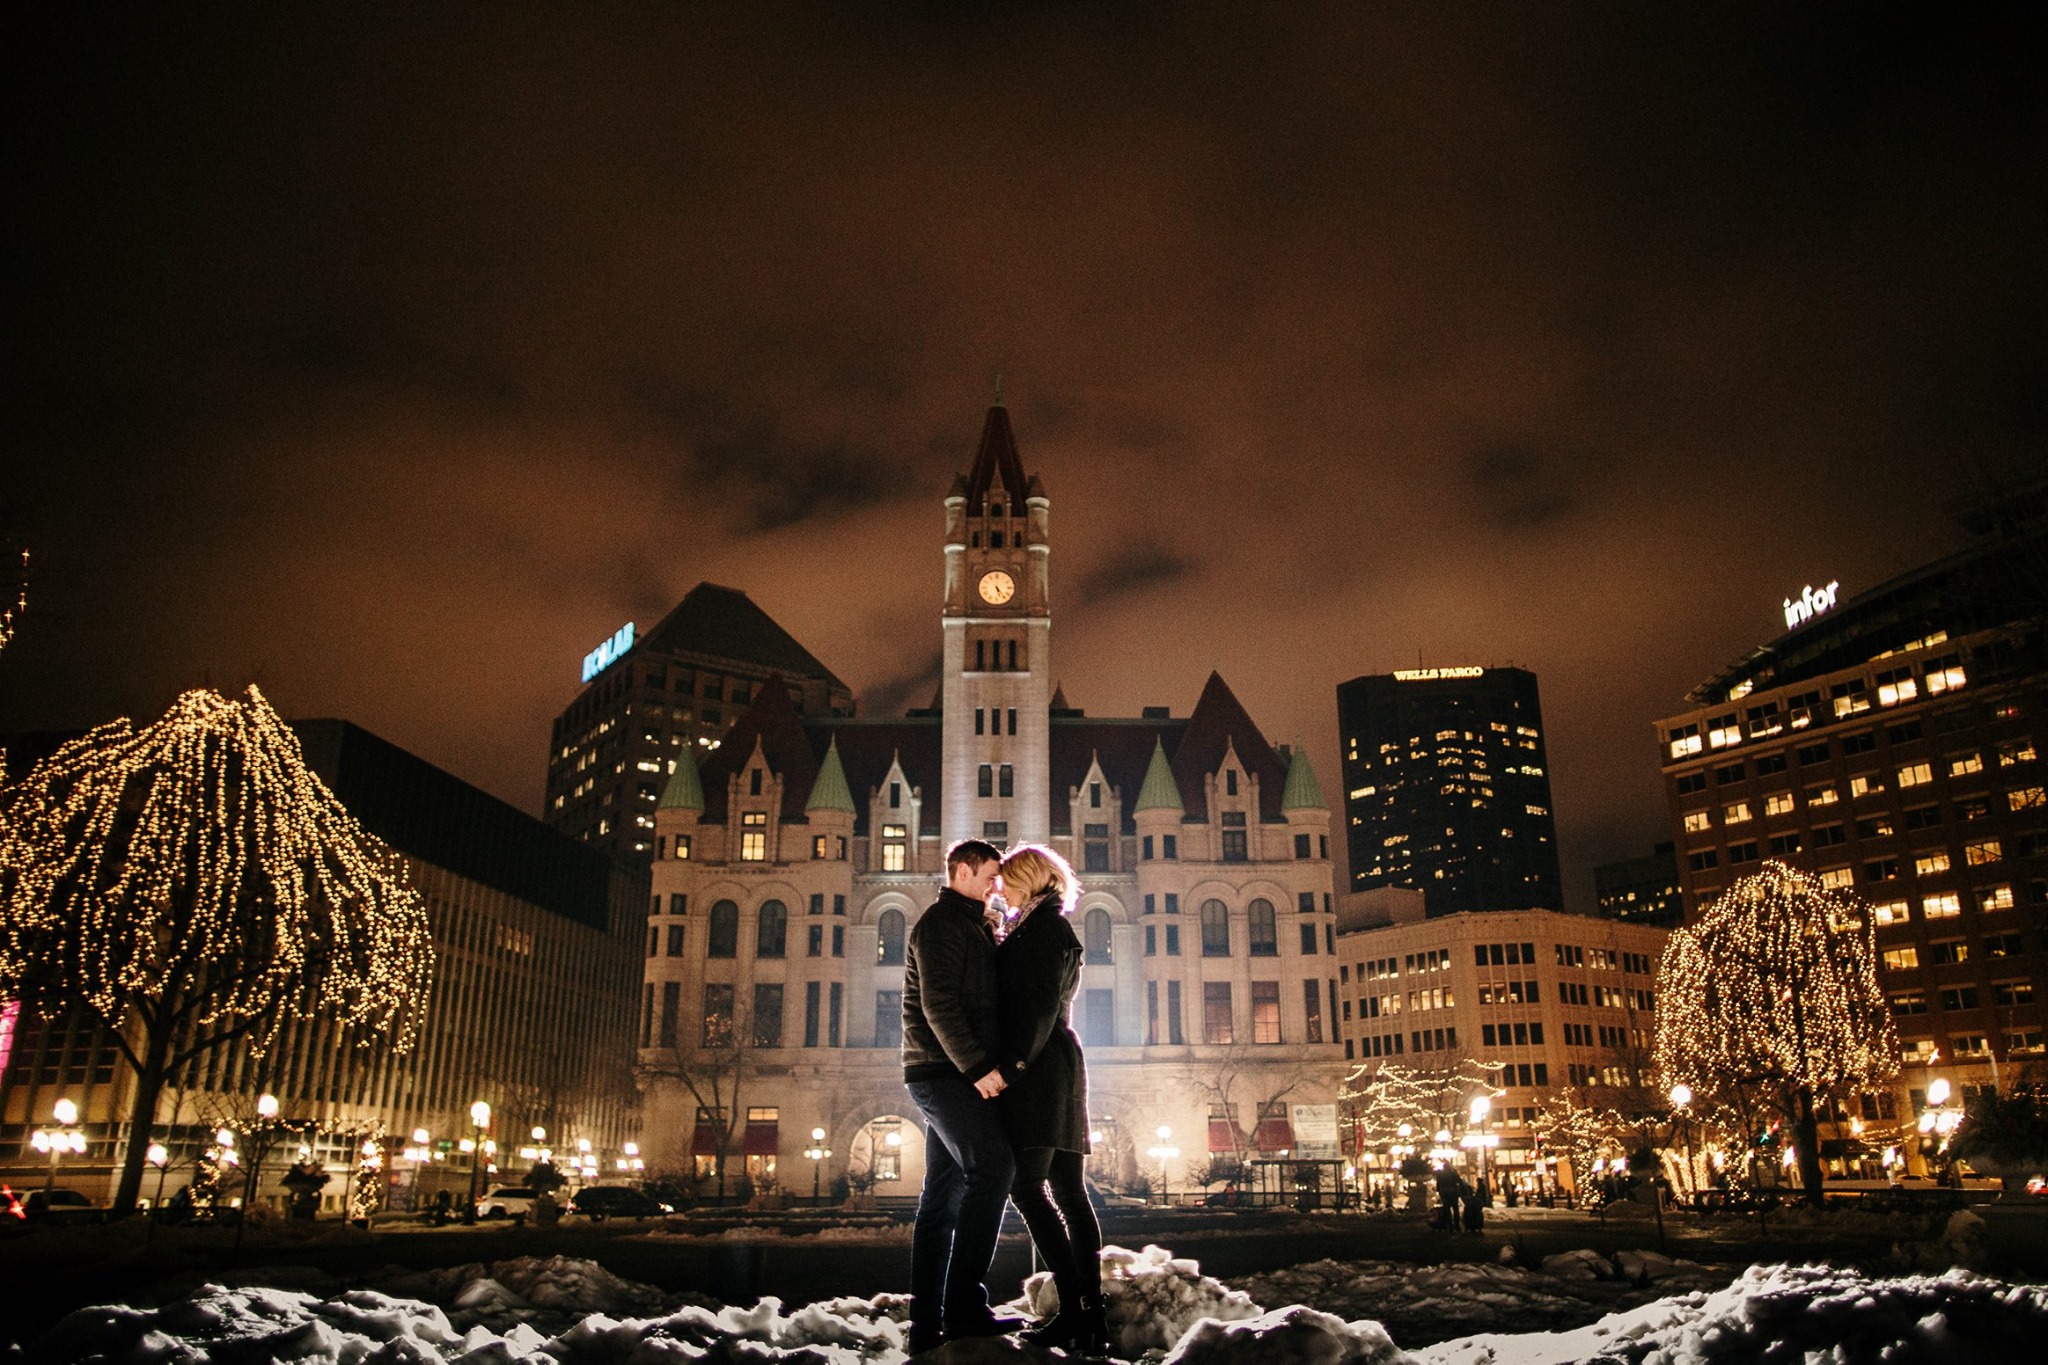 A couple holding hands and posing in front of a clock tower during night time 